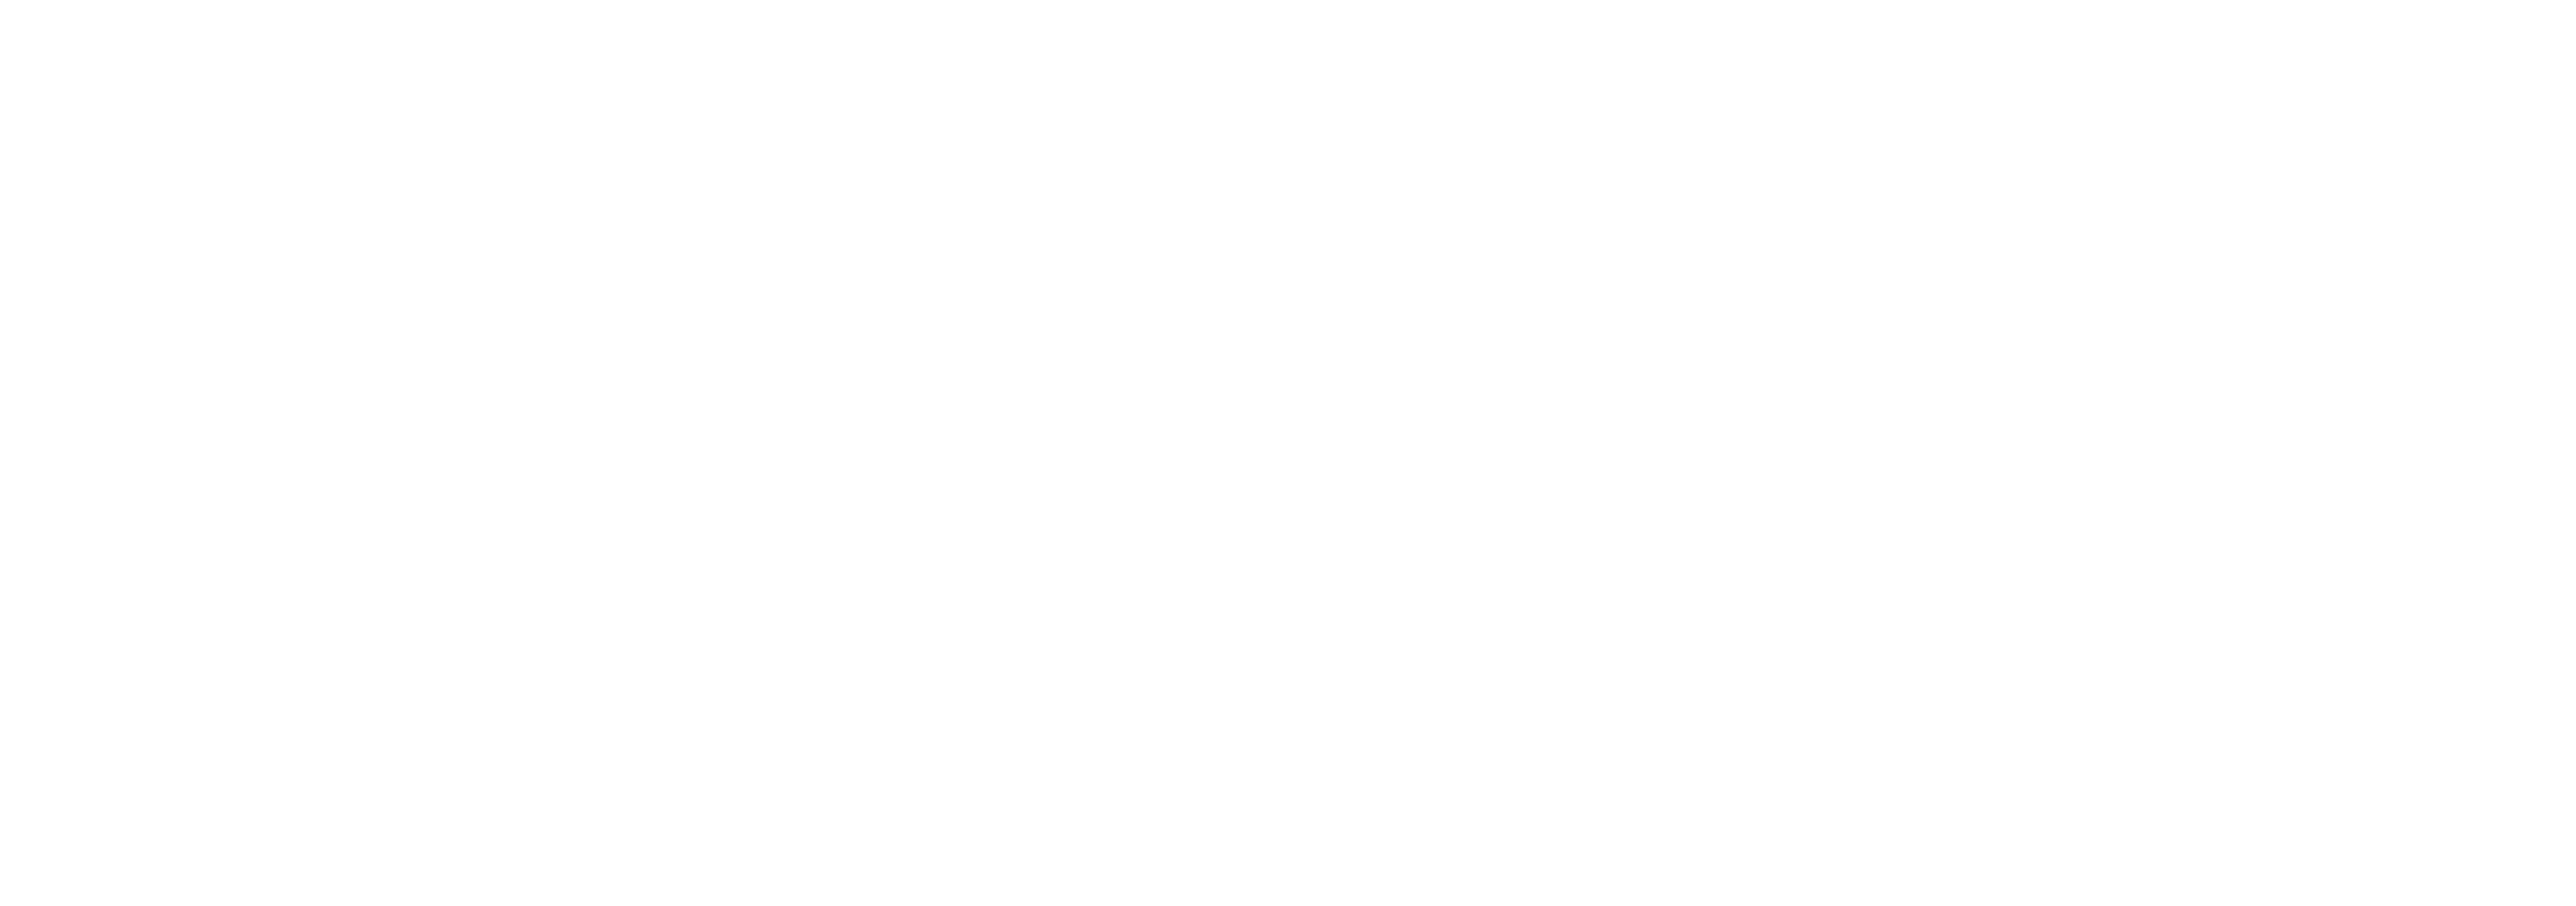 PayFast By Network - White